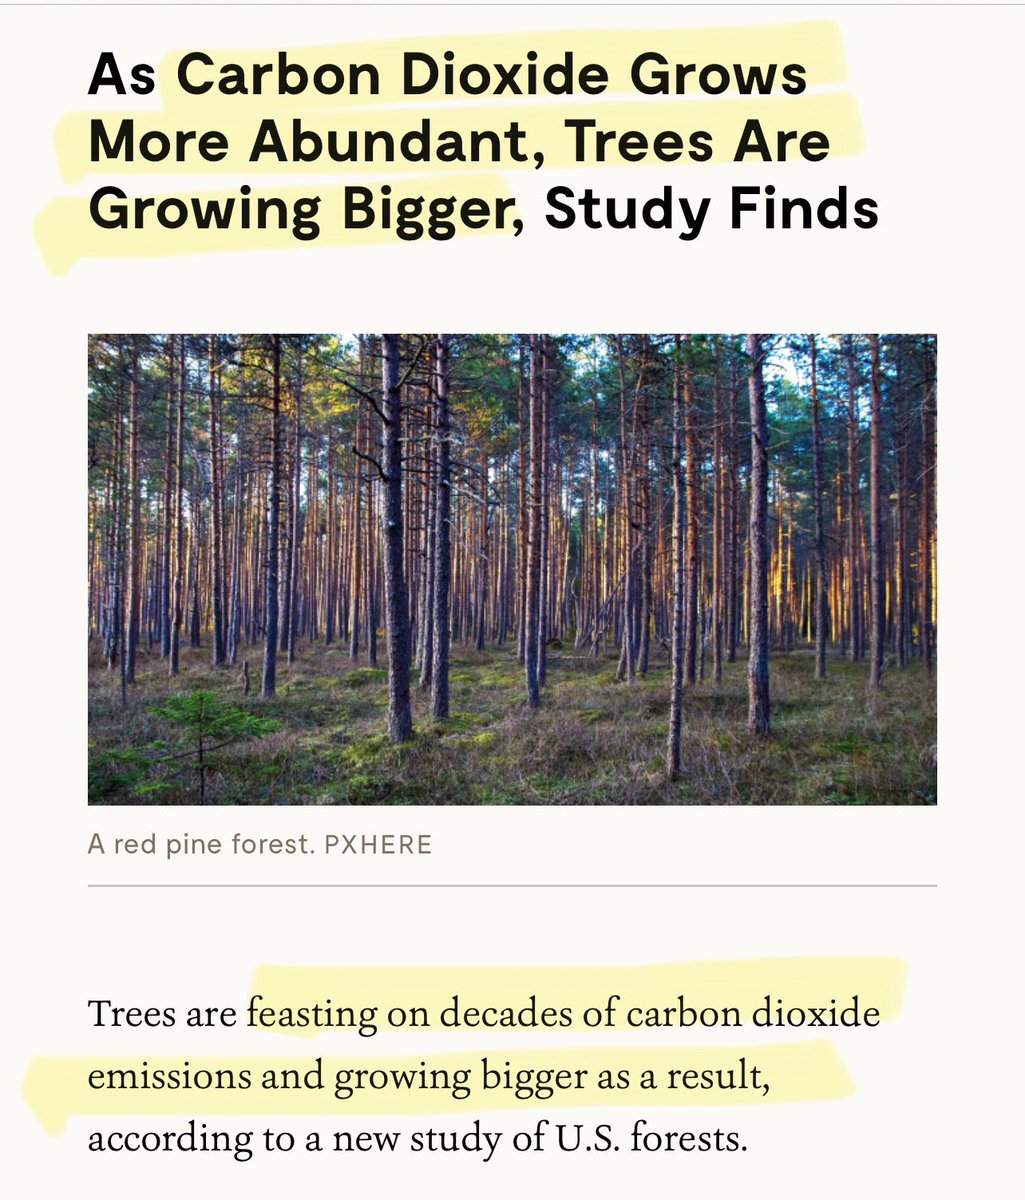 CO2 - Oops narrative fail. A study by Yale University has concluded that Trees are feasting on decades of carbon dioxide emissions and growing bigger as a result, due to, phenomenon known as “carbon fertilization.” Awkward for the climate grifters 🤡